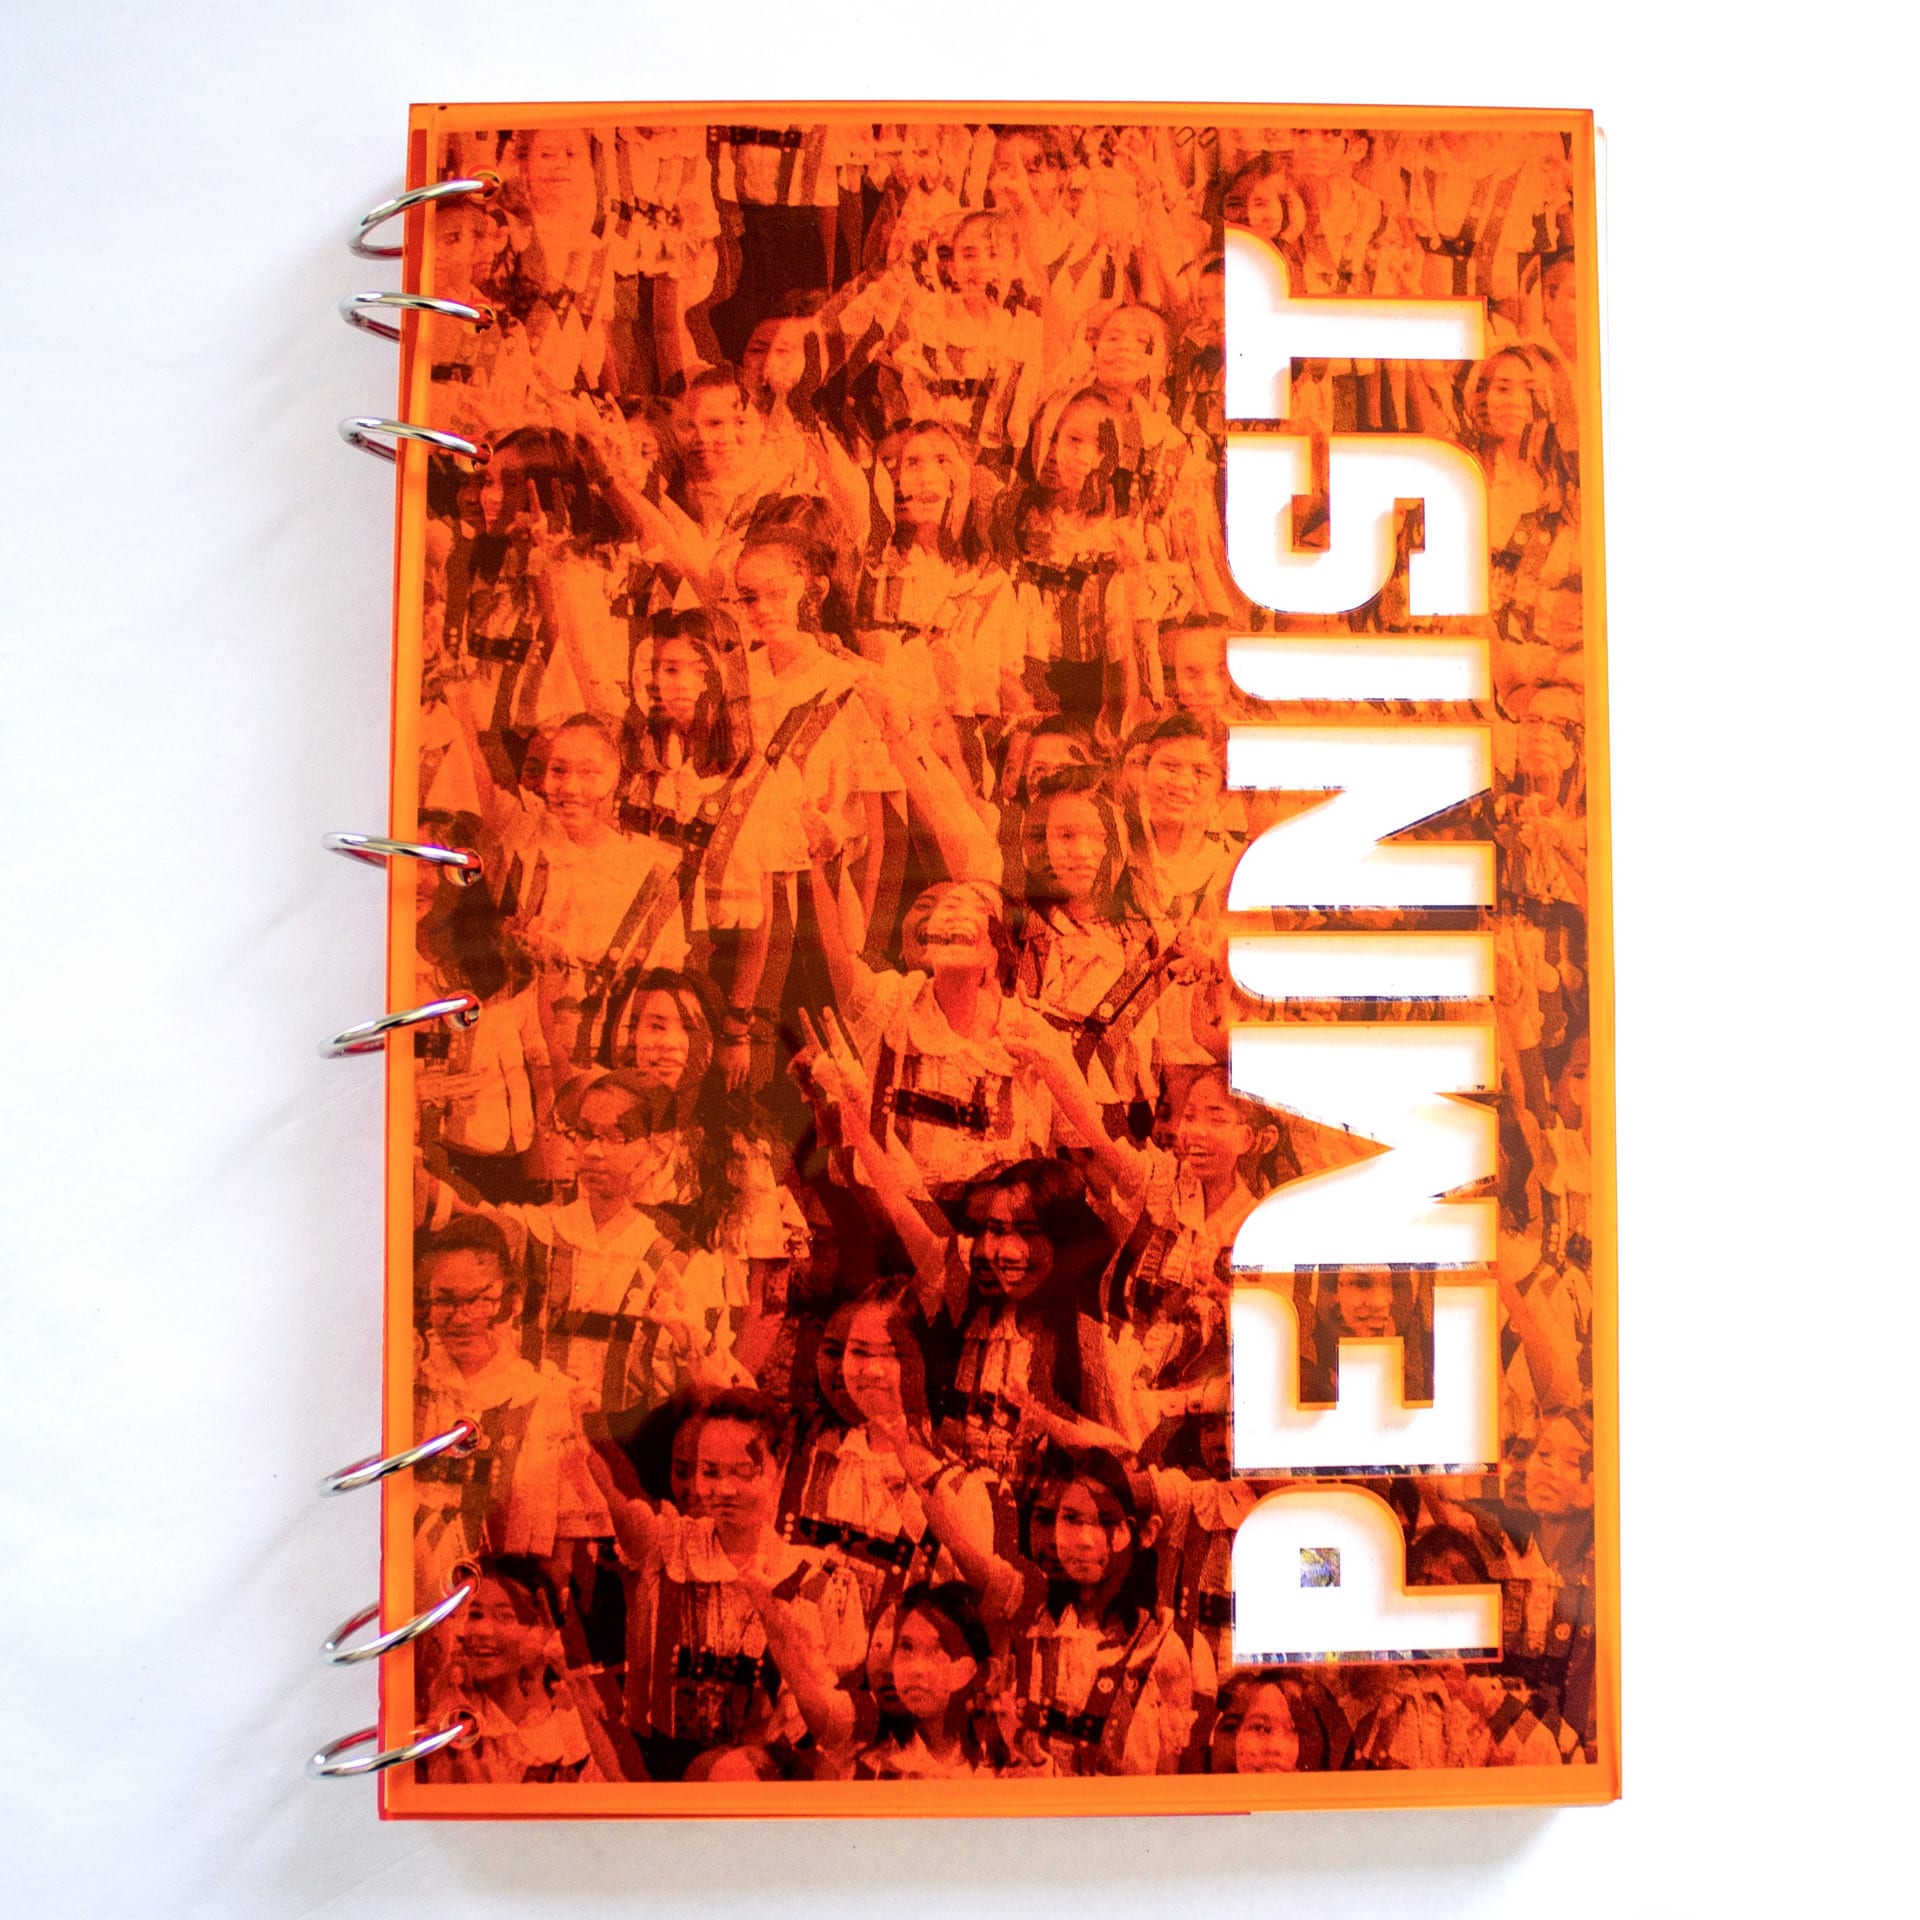 The image shows a book called 'Peminist,' with an orange acrylic cover and binded with silver rings/ 